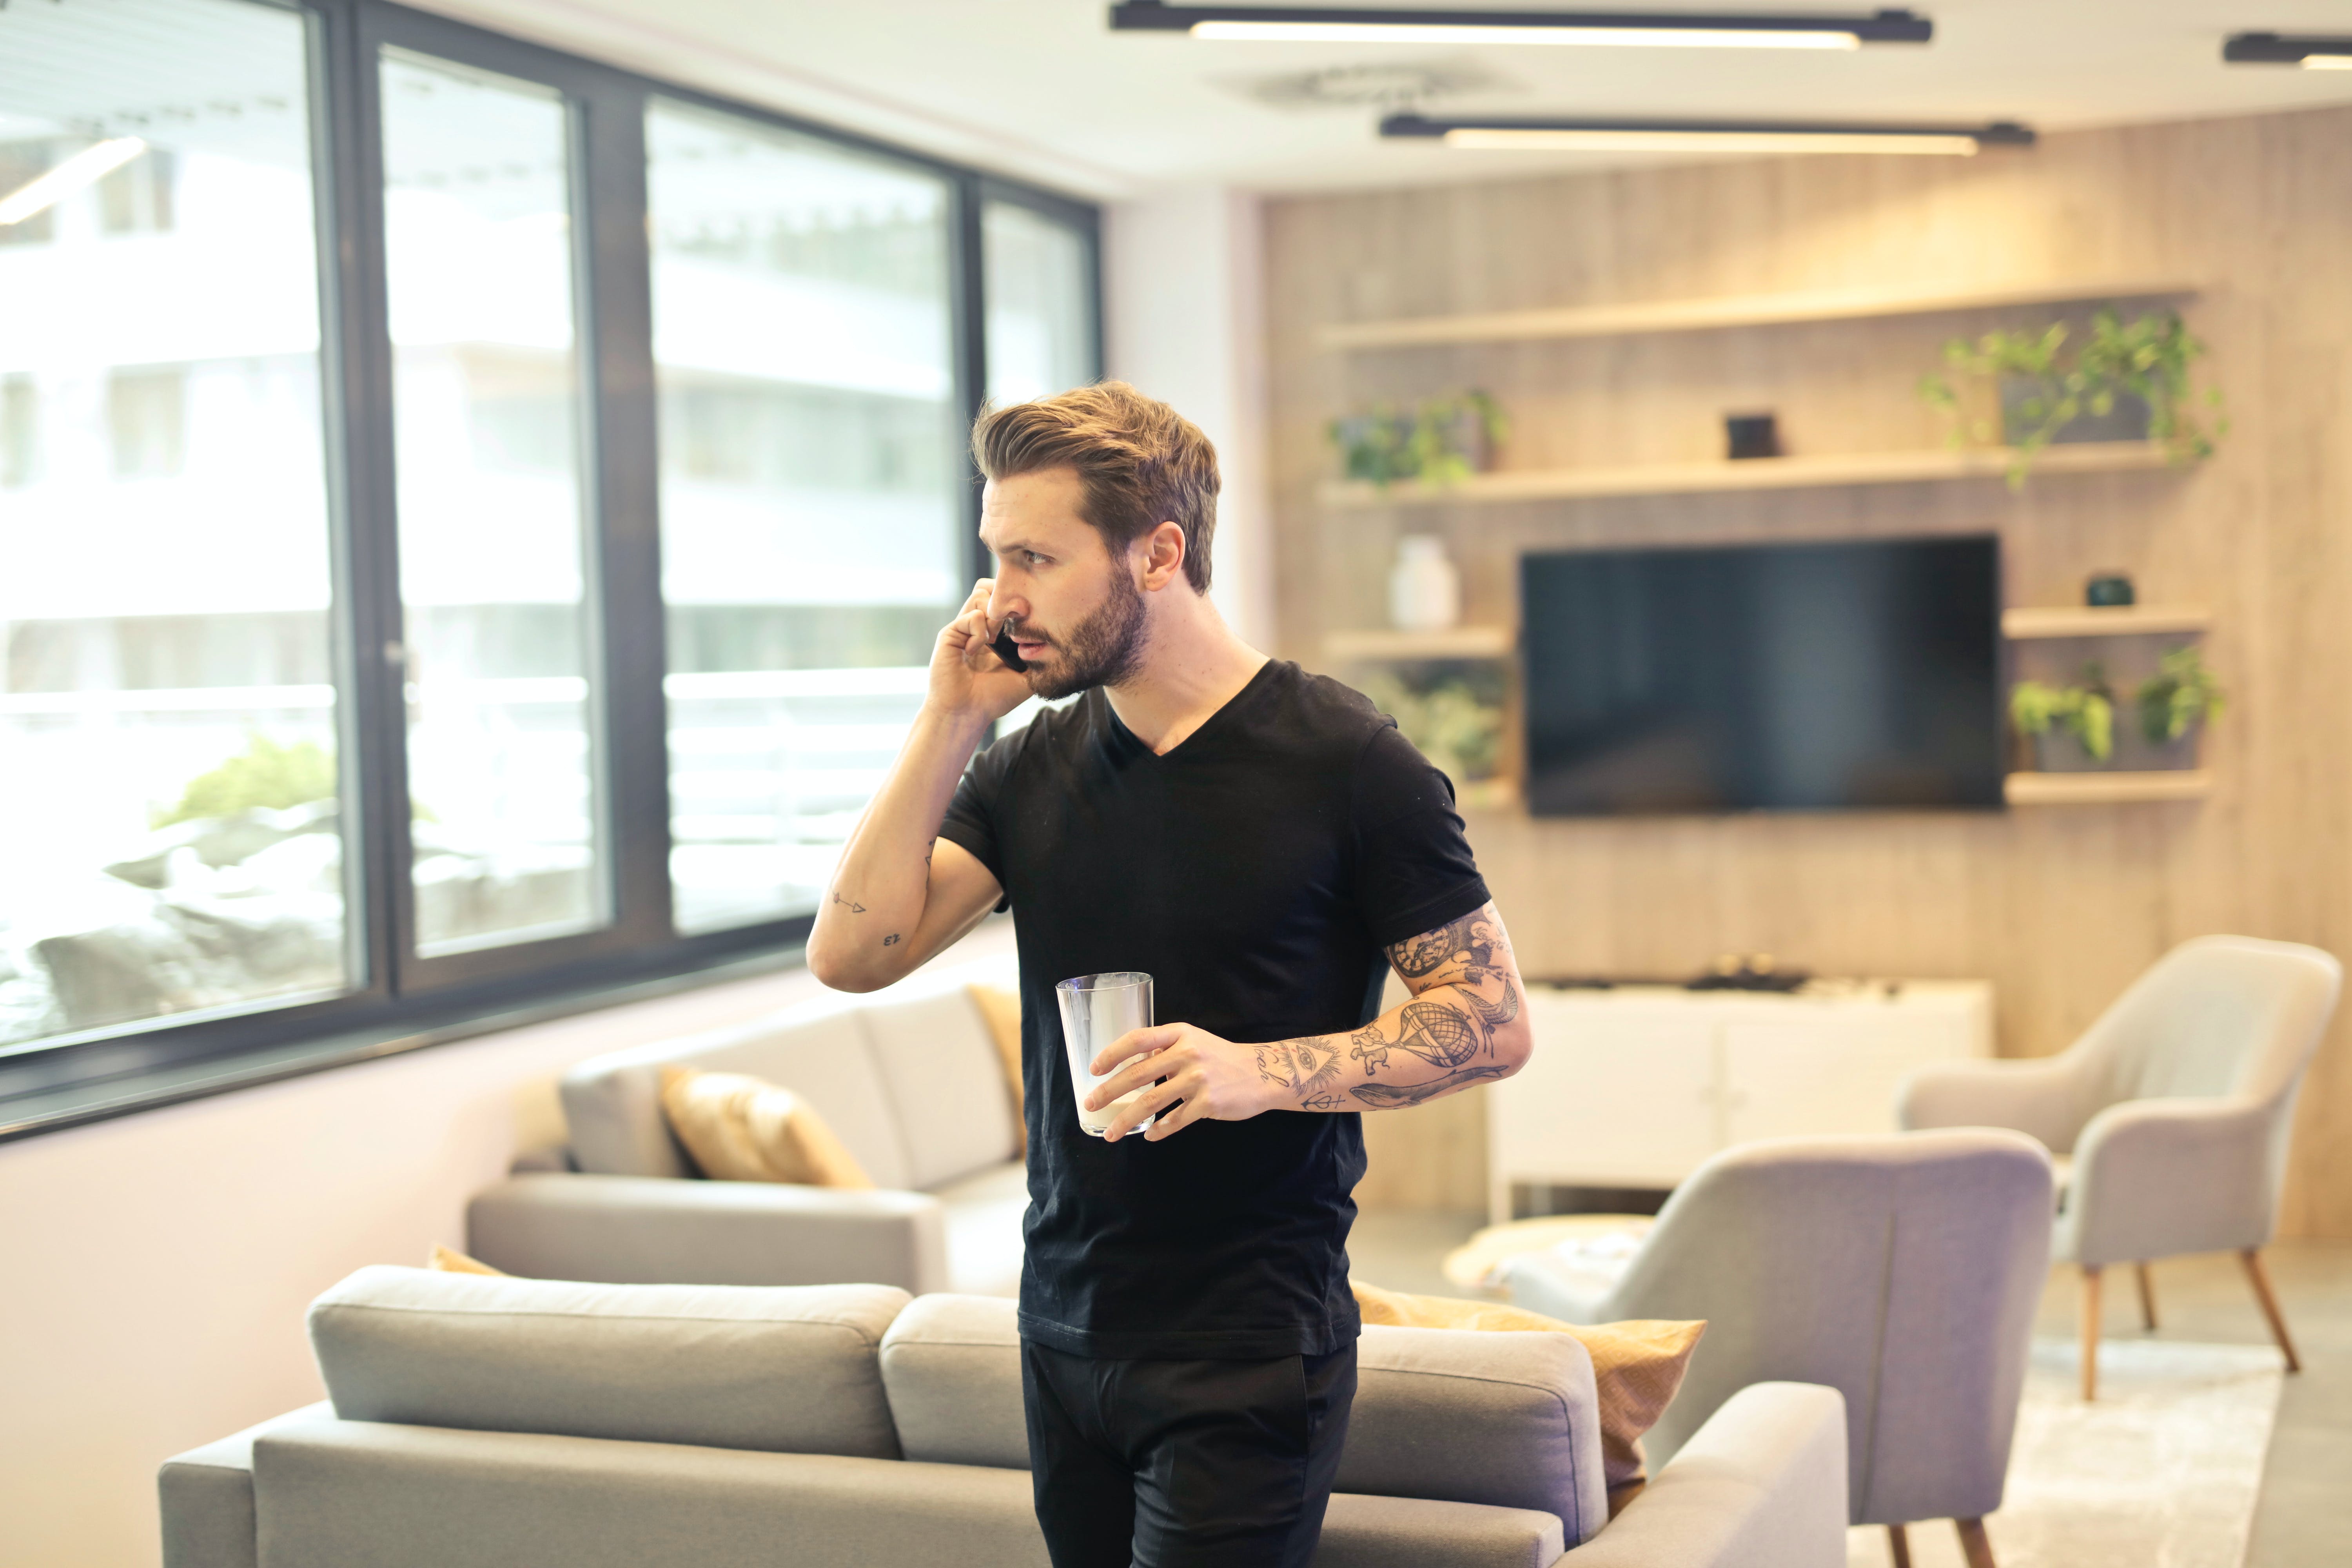 A man holding a cup while on a call | Source: Pexels